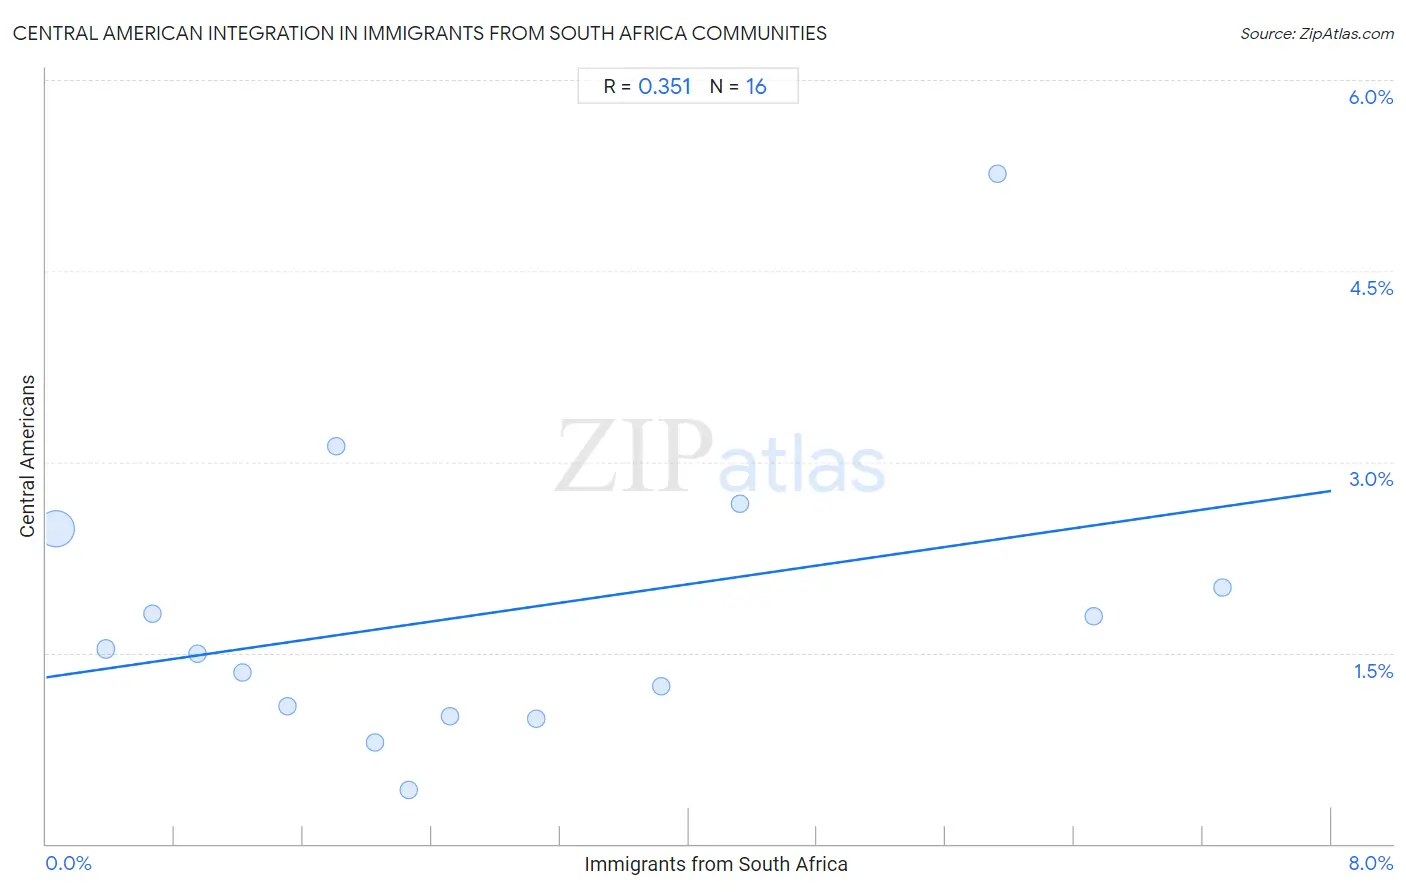 Immigrants from South Africa Integration in Central American Communities